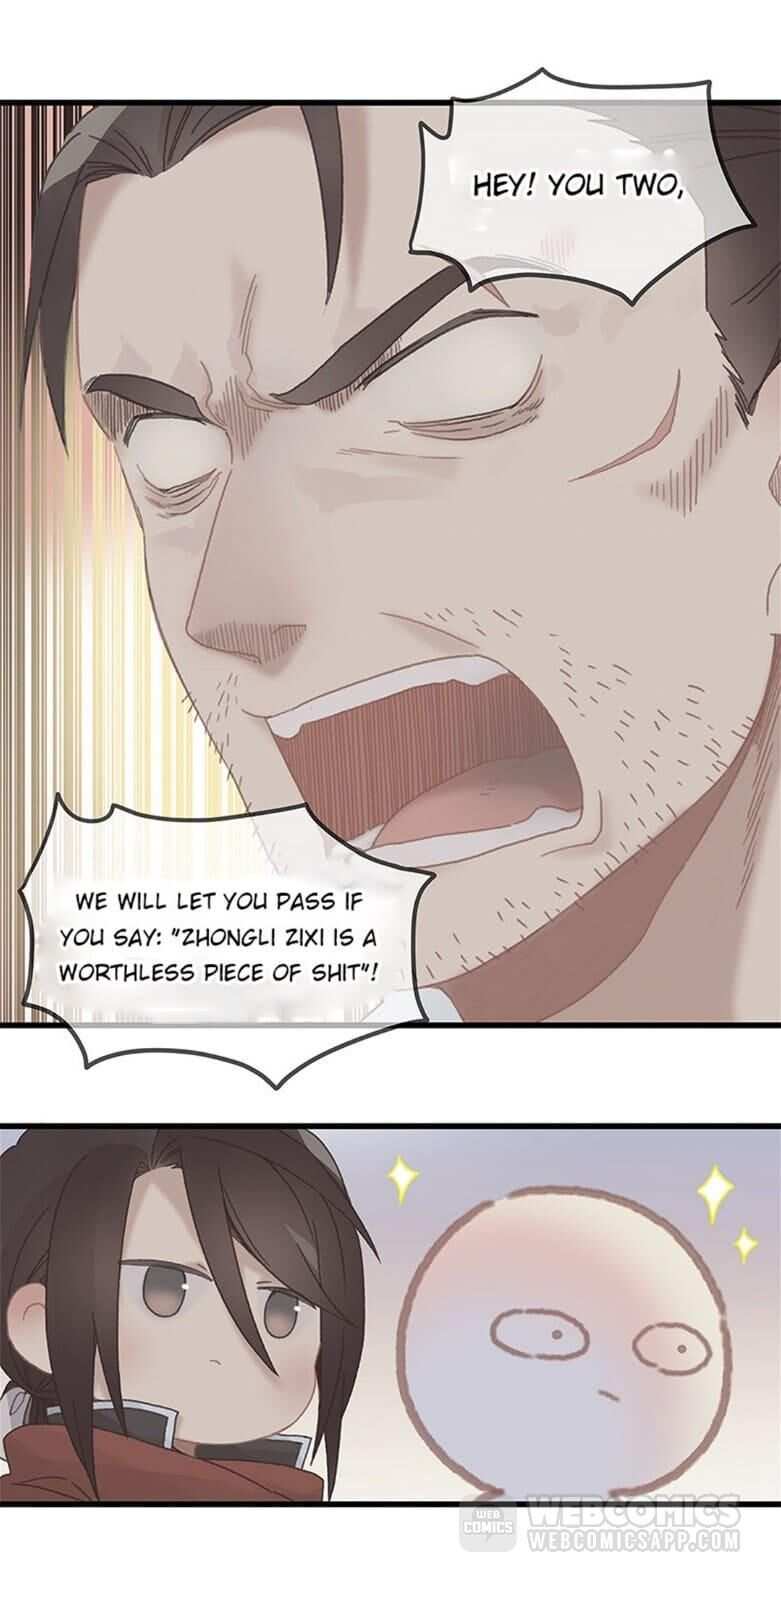 Life Going Wild With Plug-ins chapter 92 - page 2